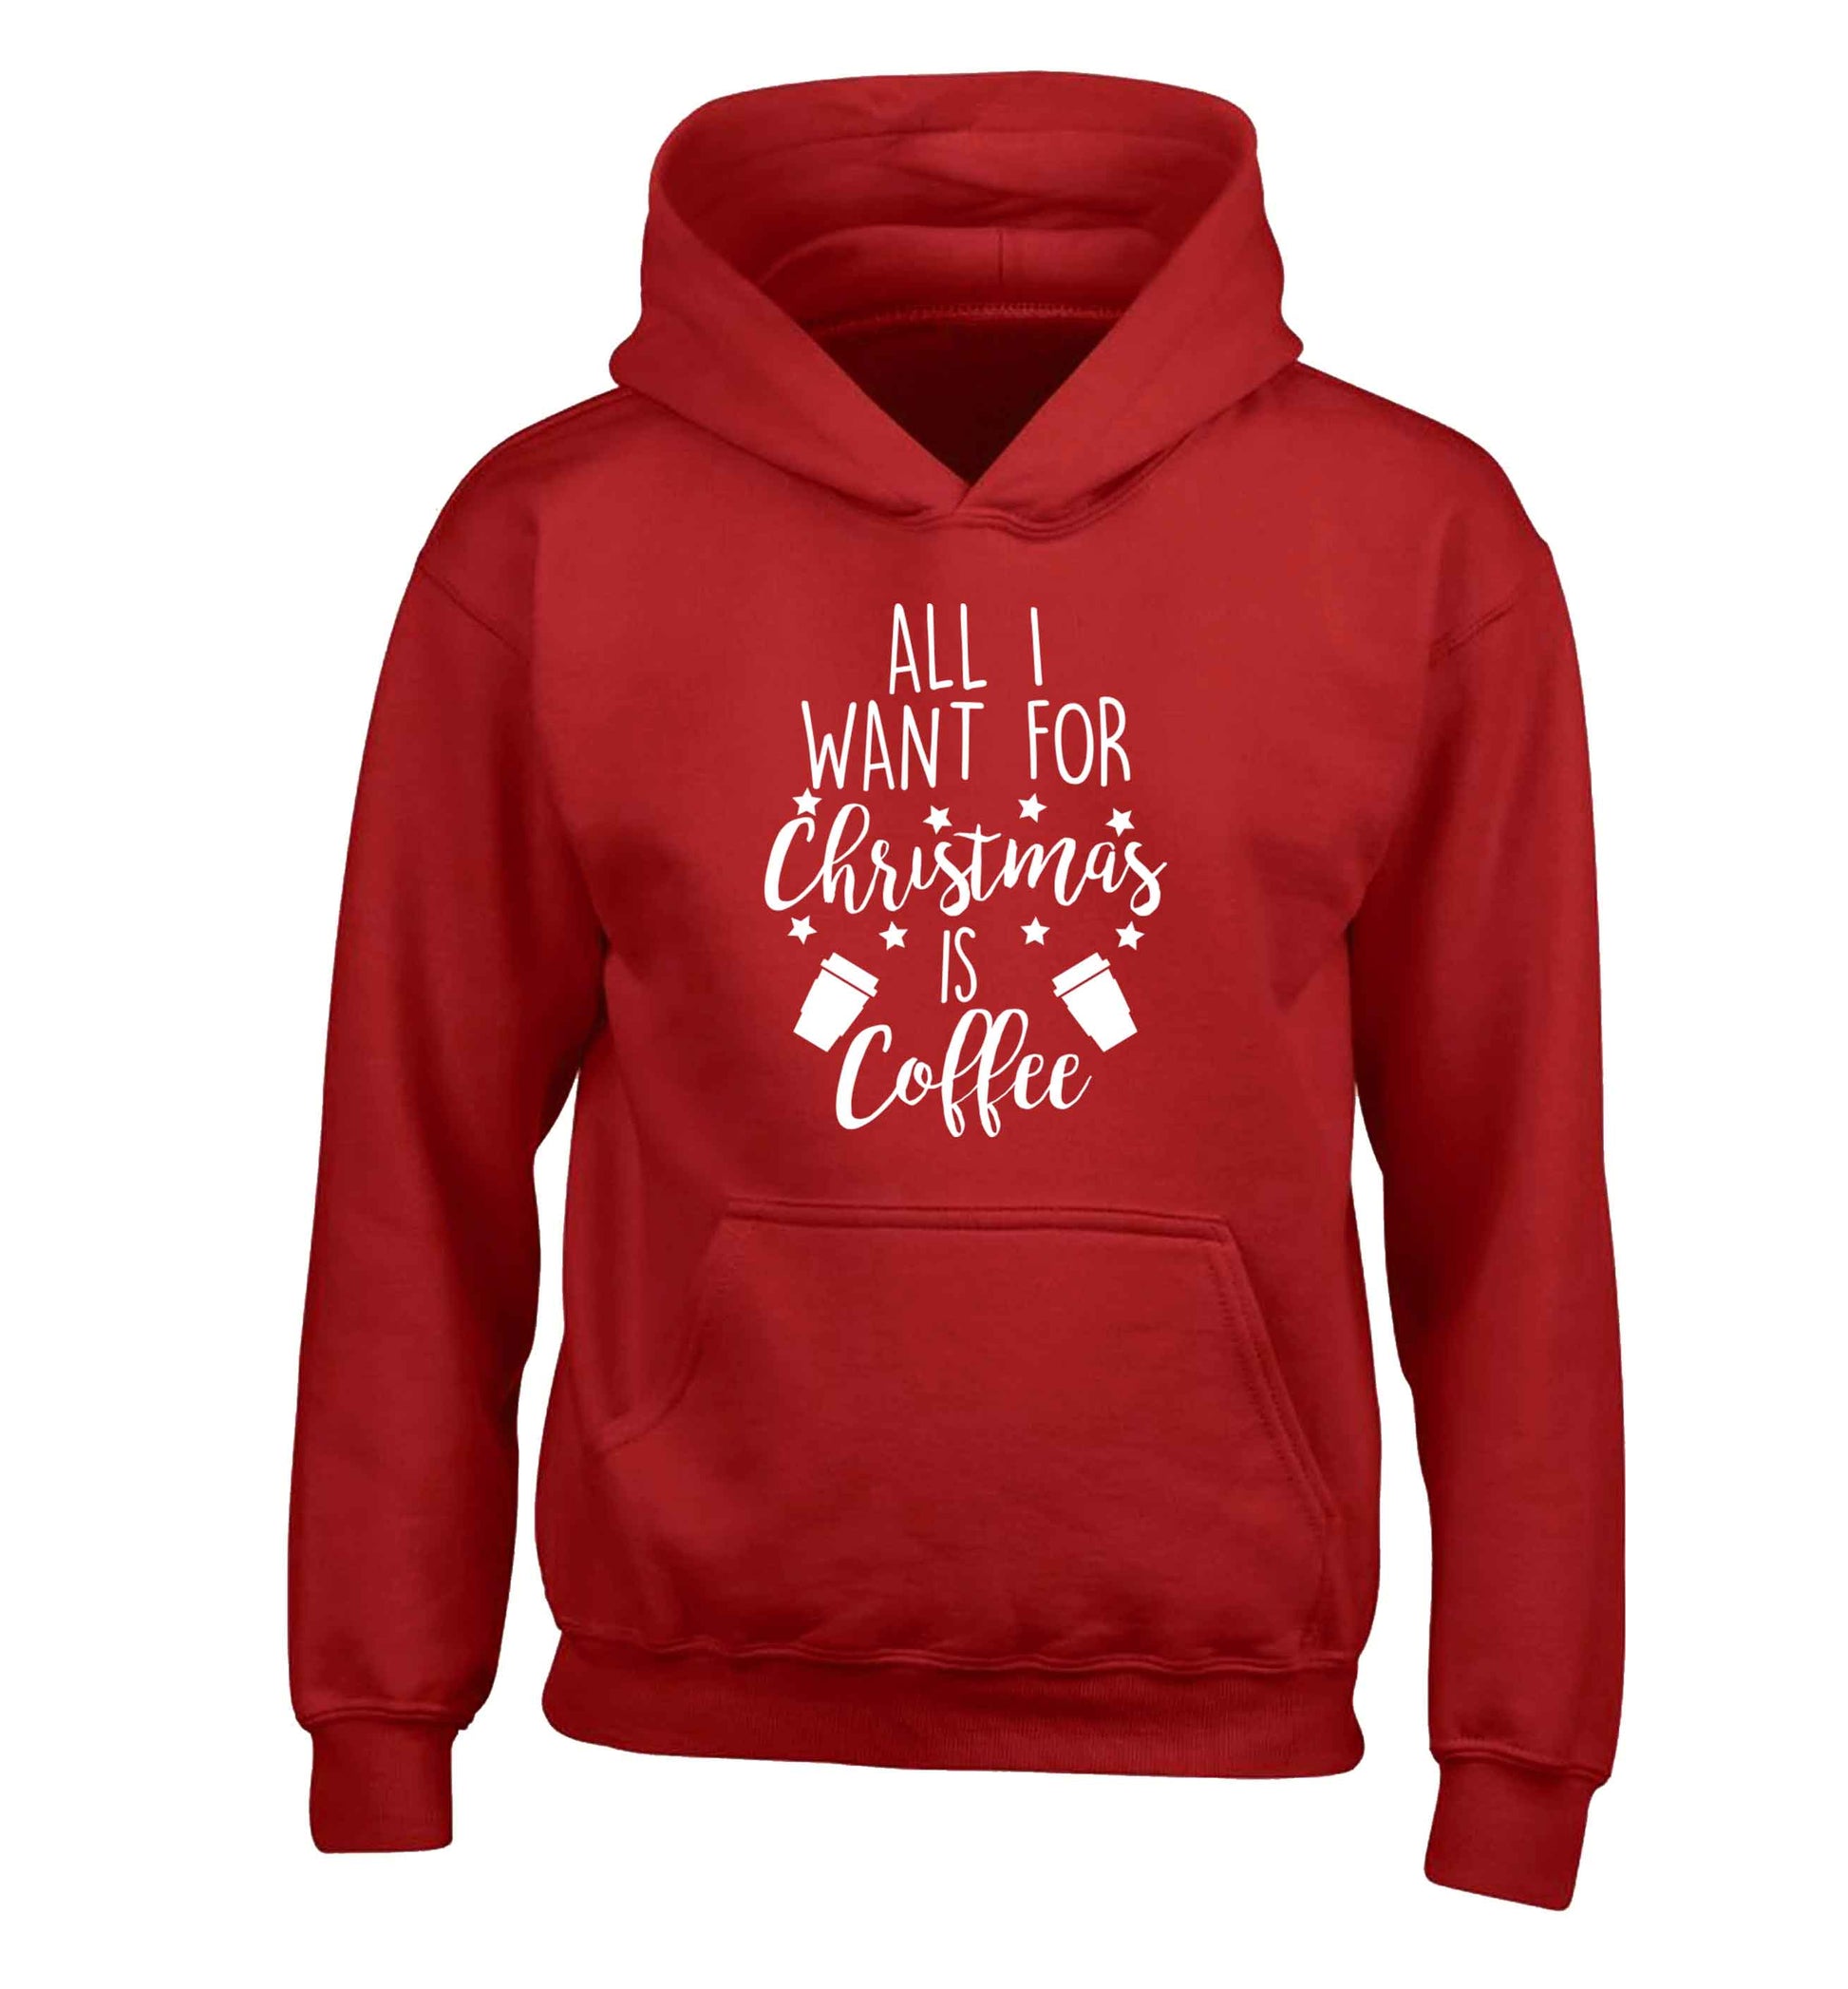 All I want for Christmas is coffee children's red hoodie 12-13 Years